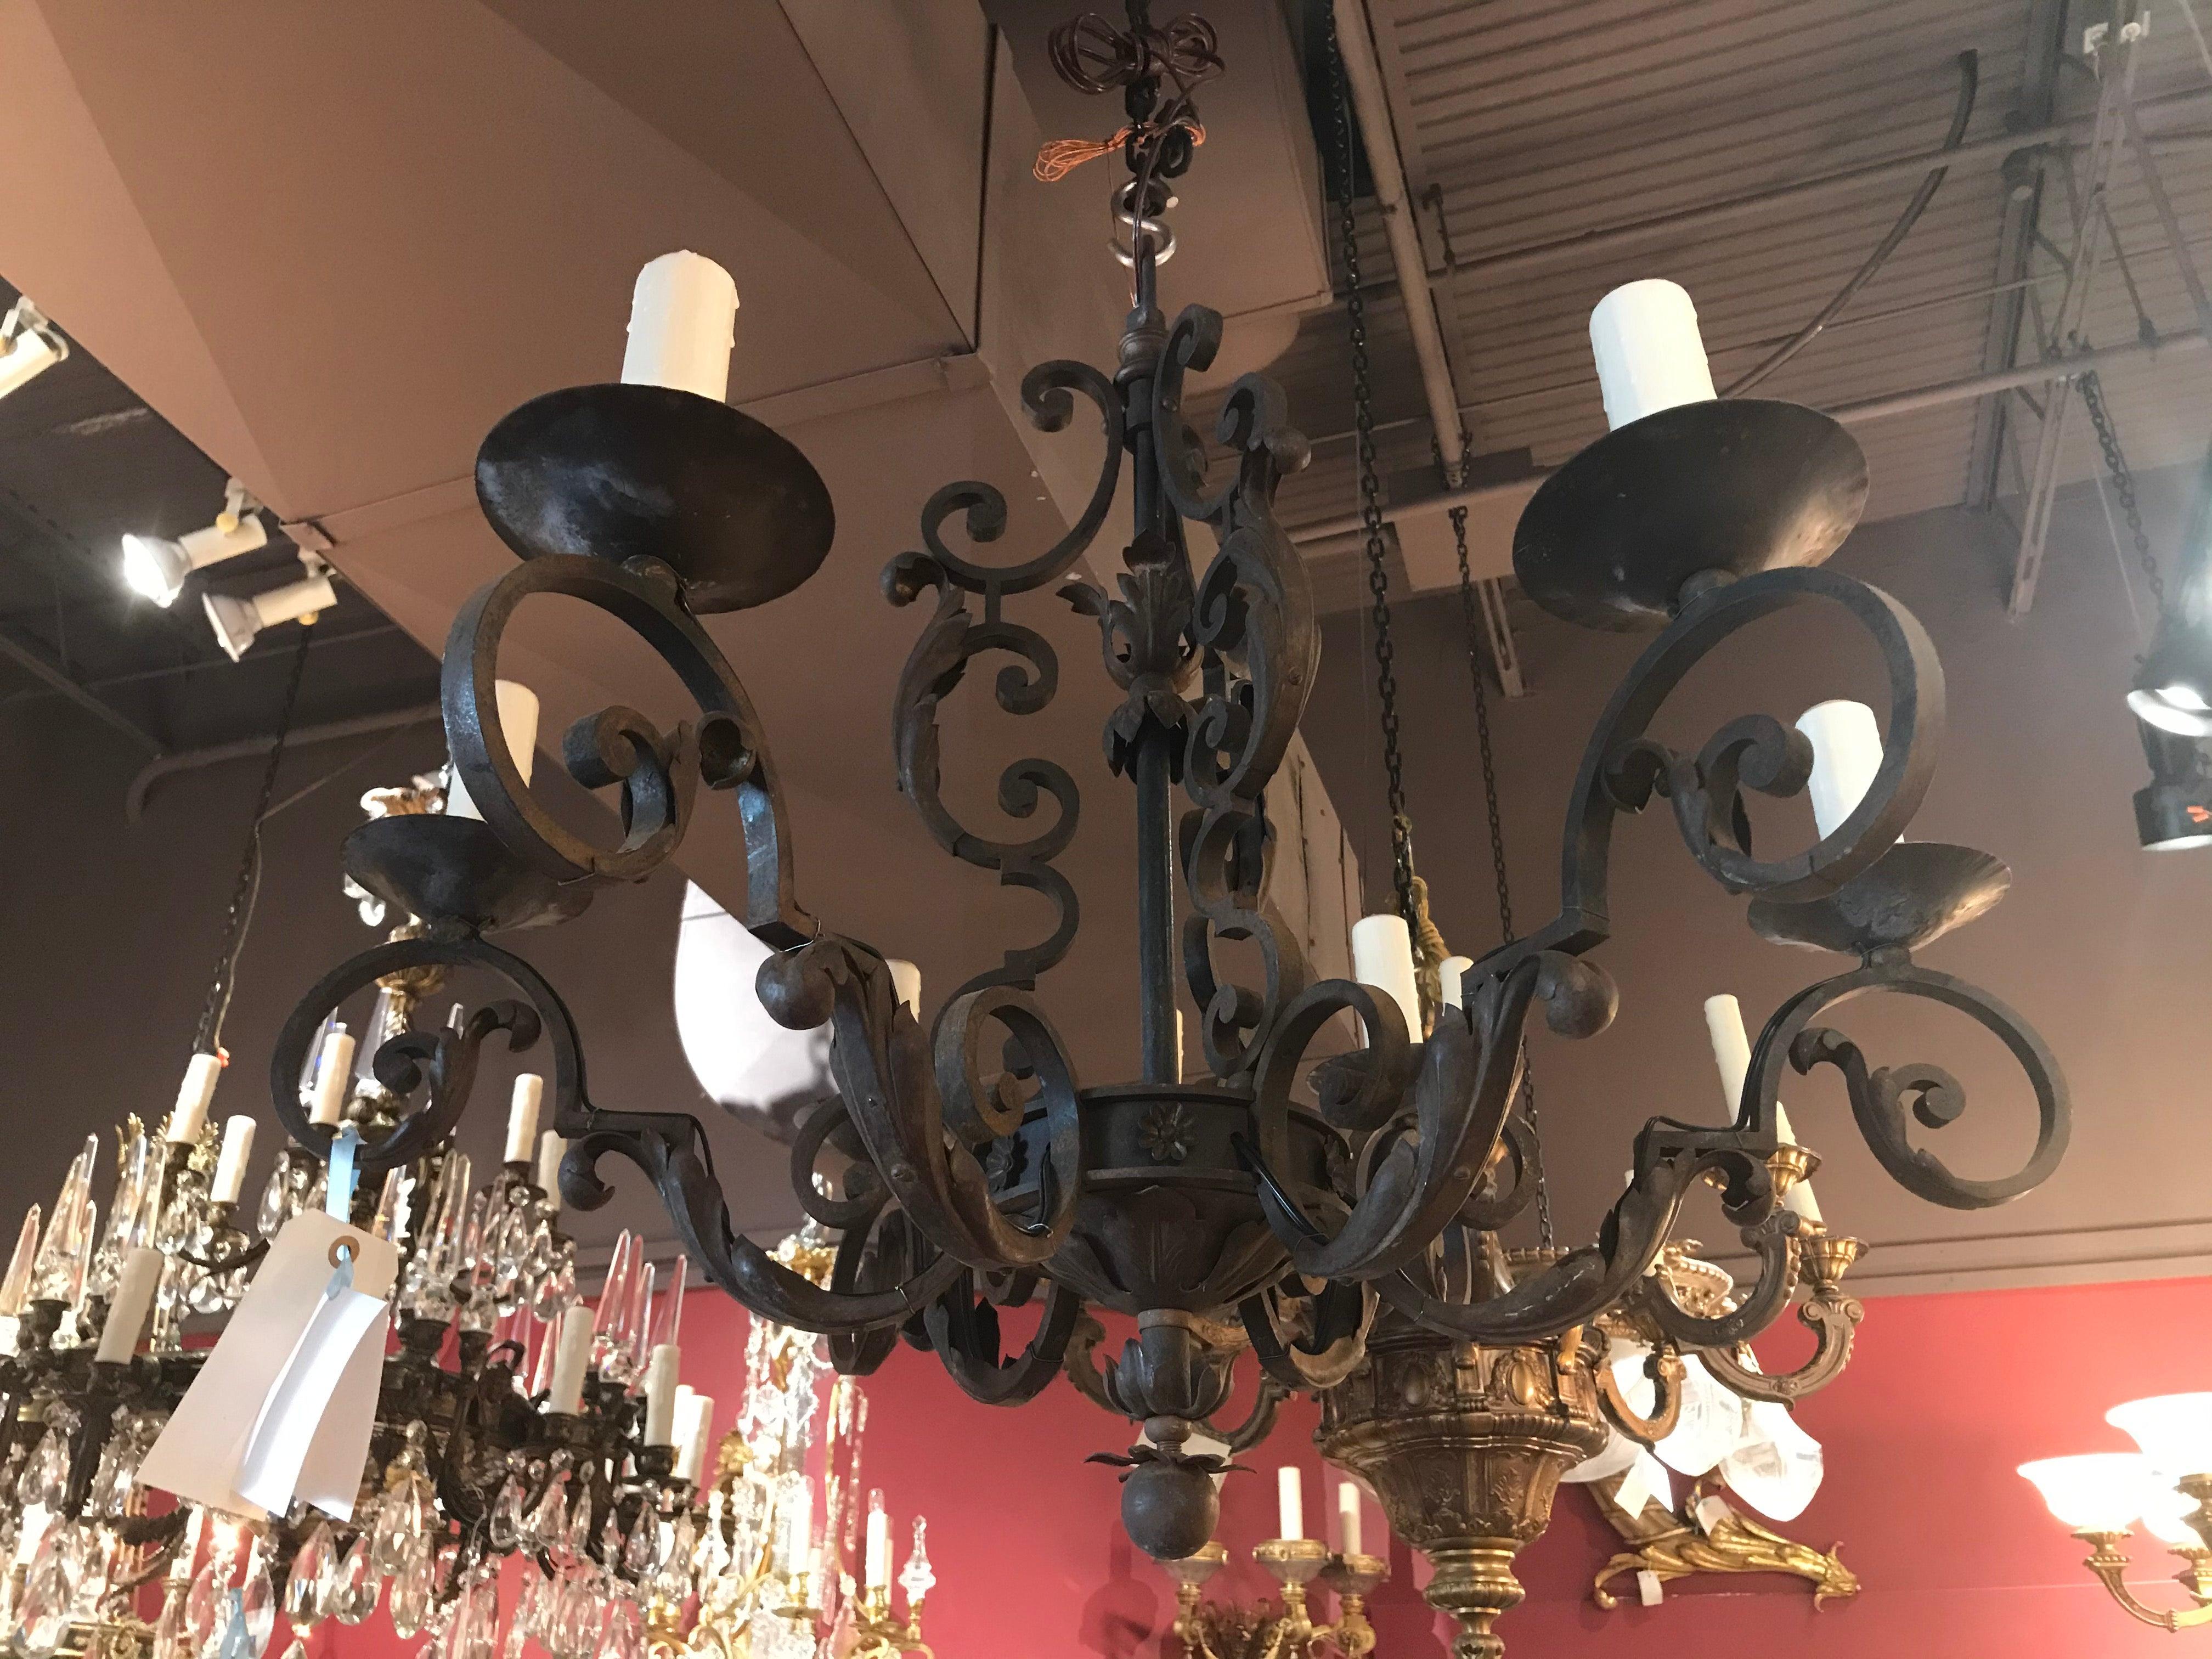 A very fine and elegant iron chandelier. Great workmanship. 6 lights.
Dimensions: Height 28 1/2